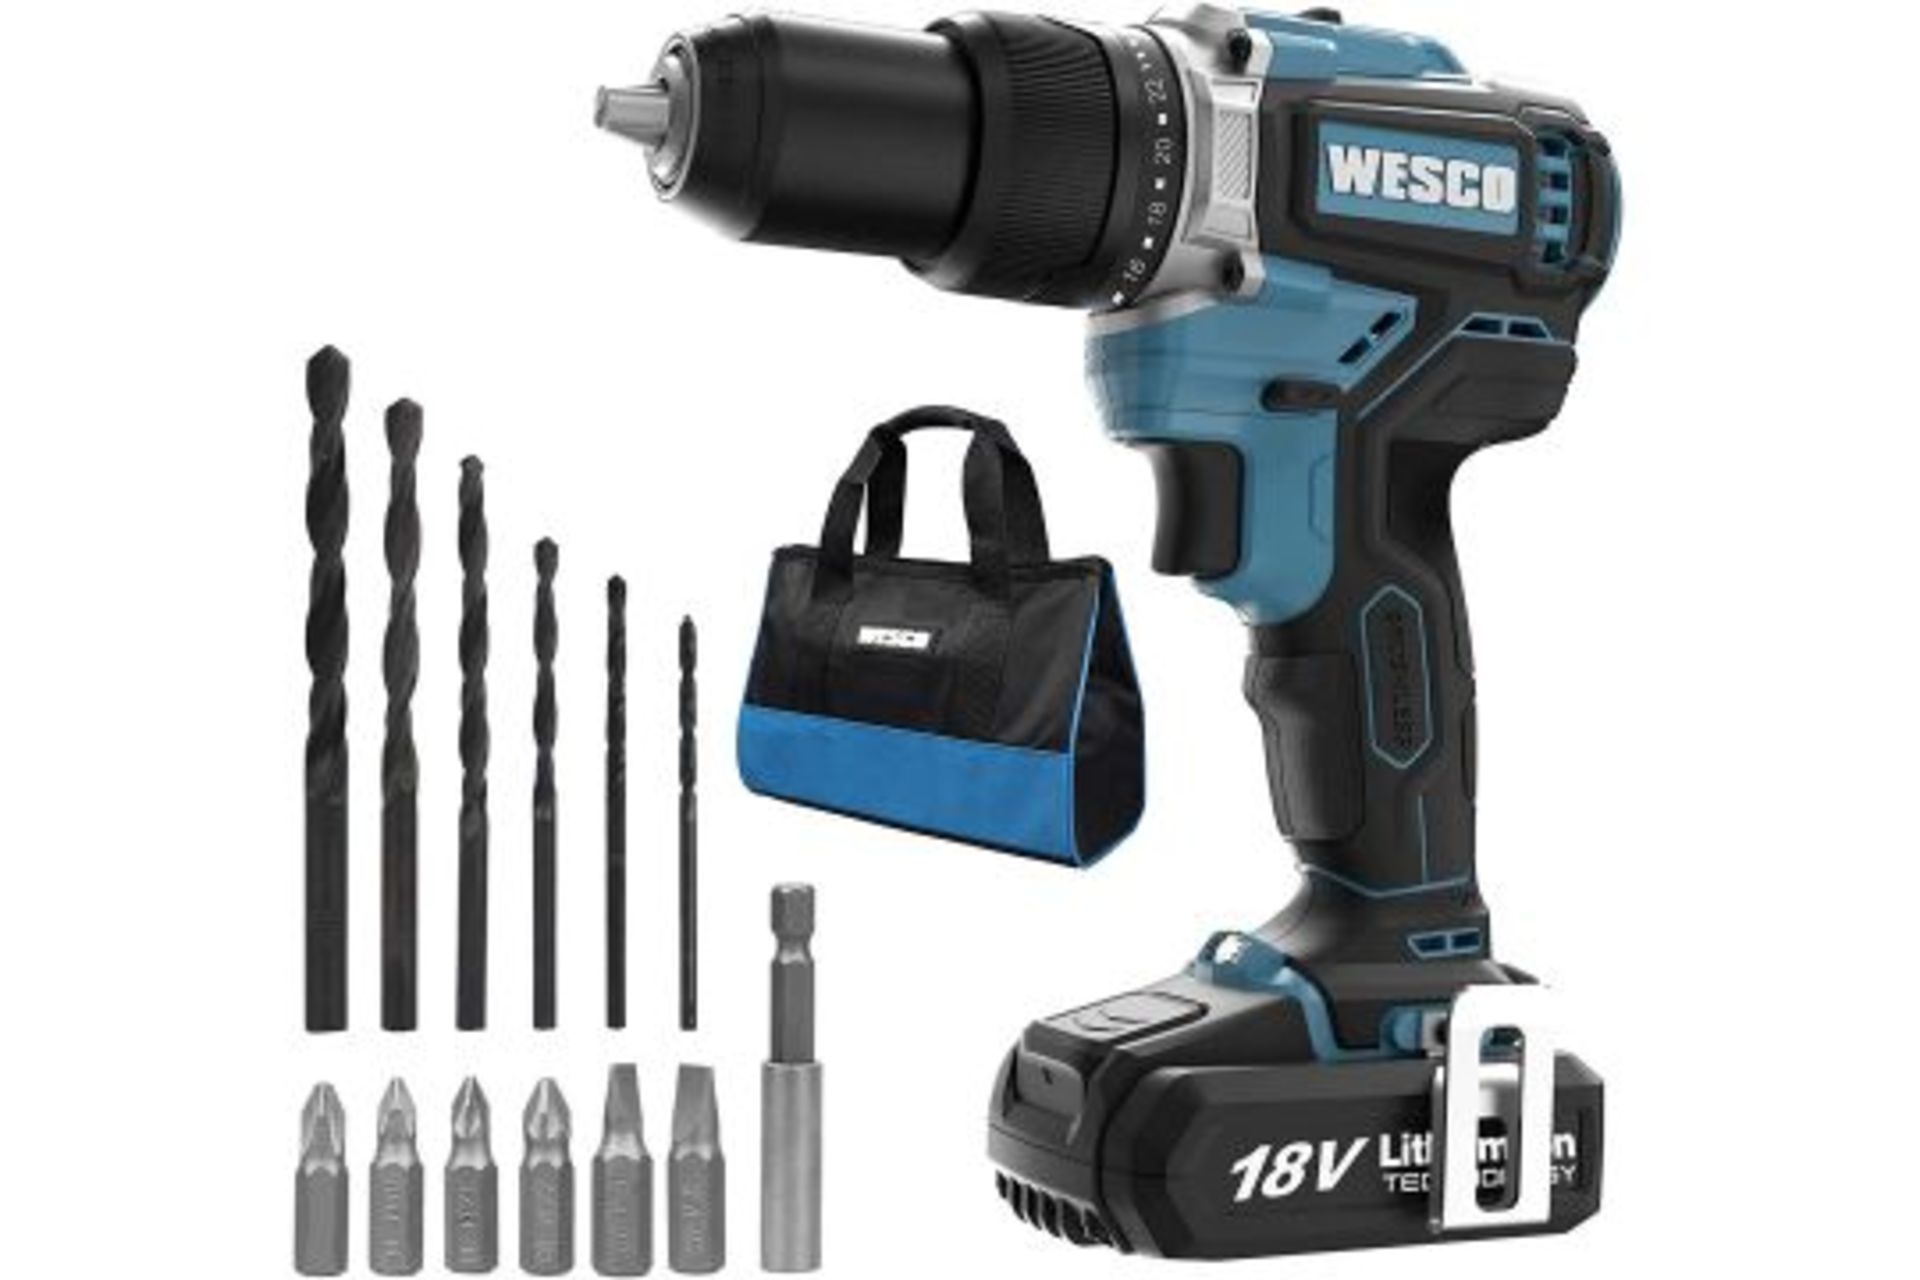 TRADE LOT 8 X NEW BOXED WESCO Brushless Cordless Drill, WESCO 18V 2.0Ah Cordless Combi Drill with 13